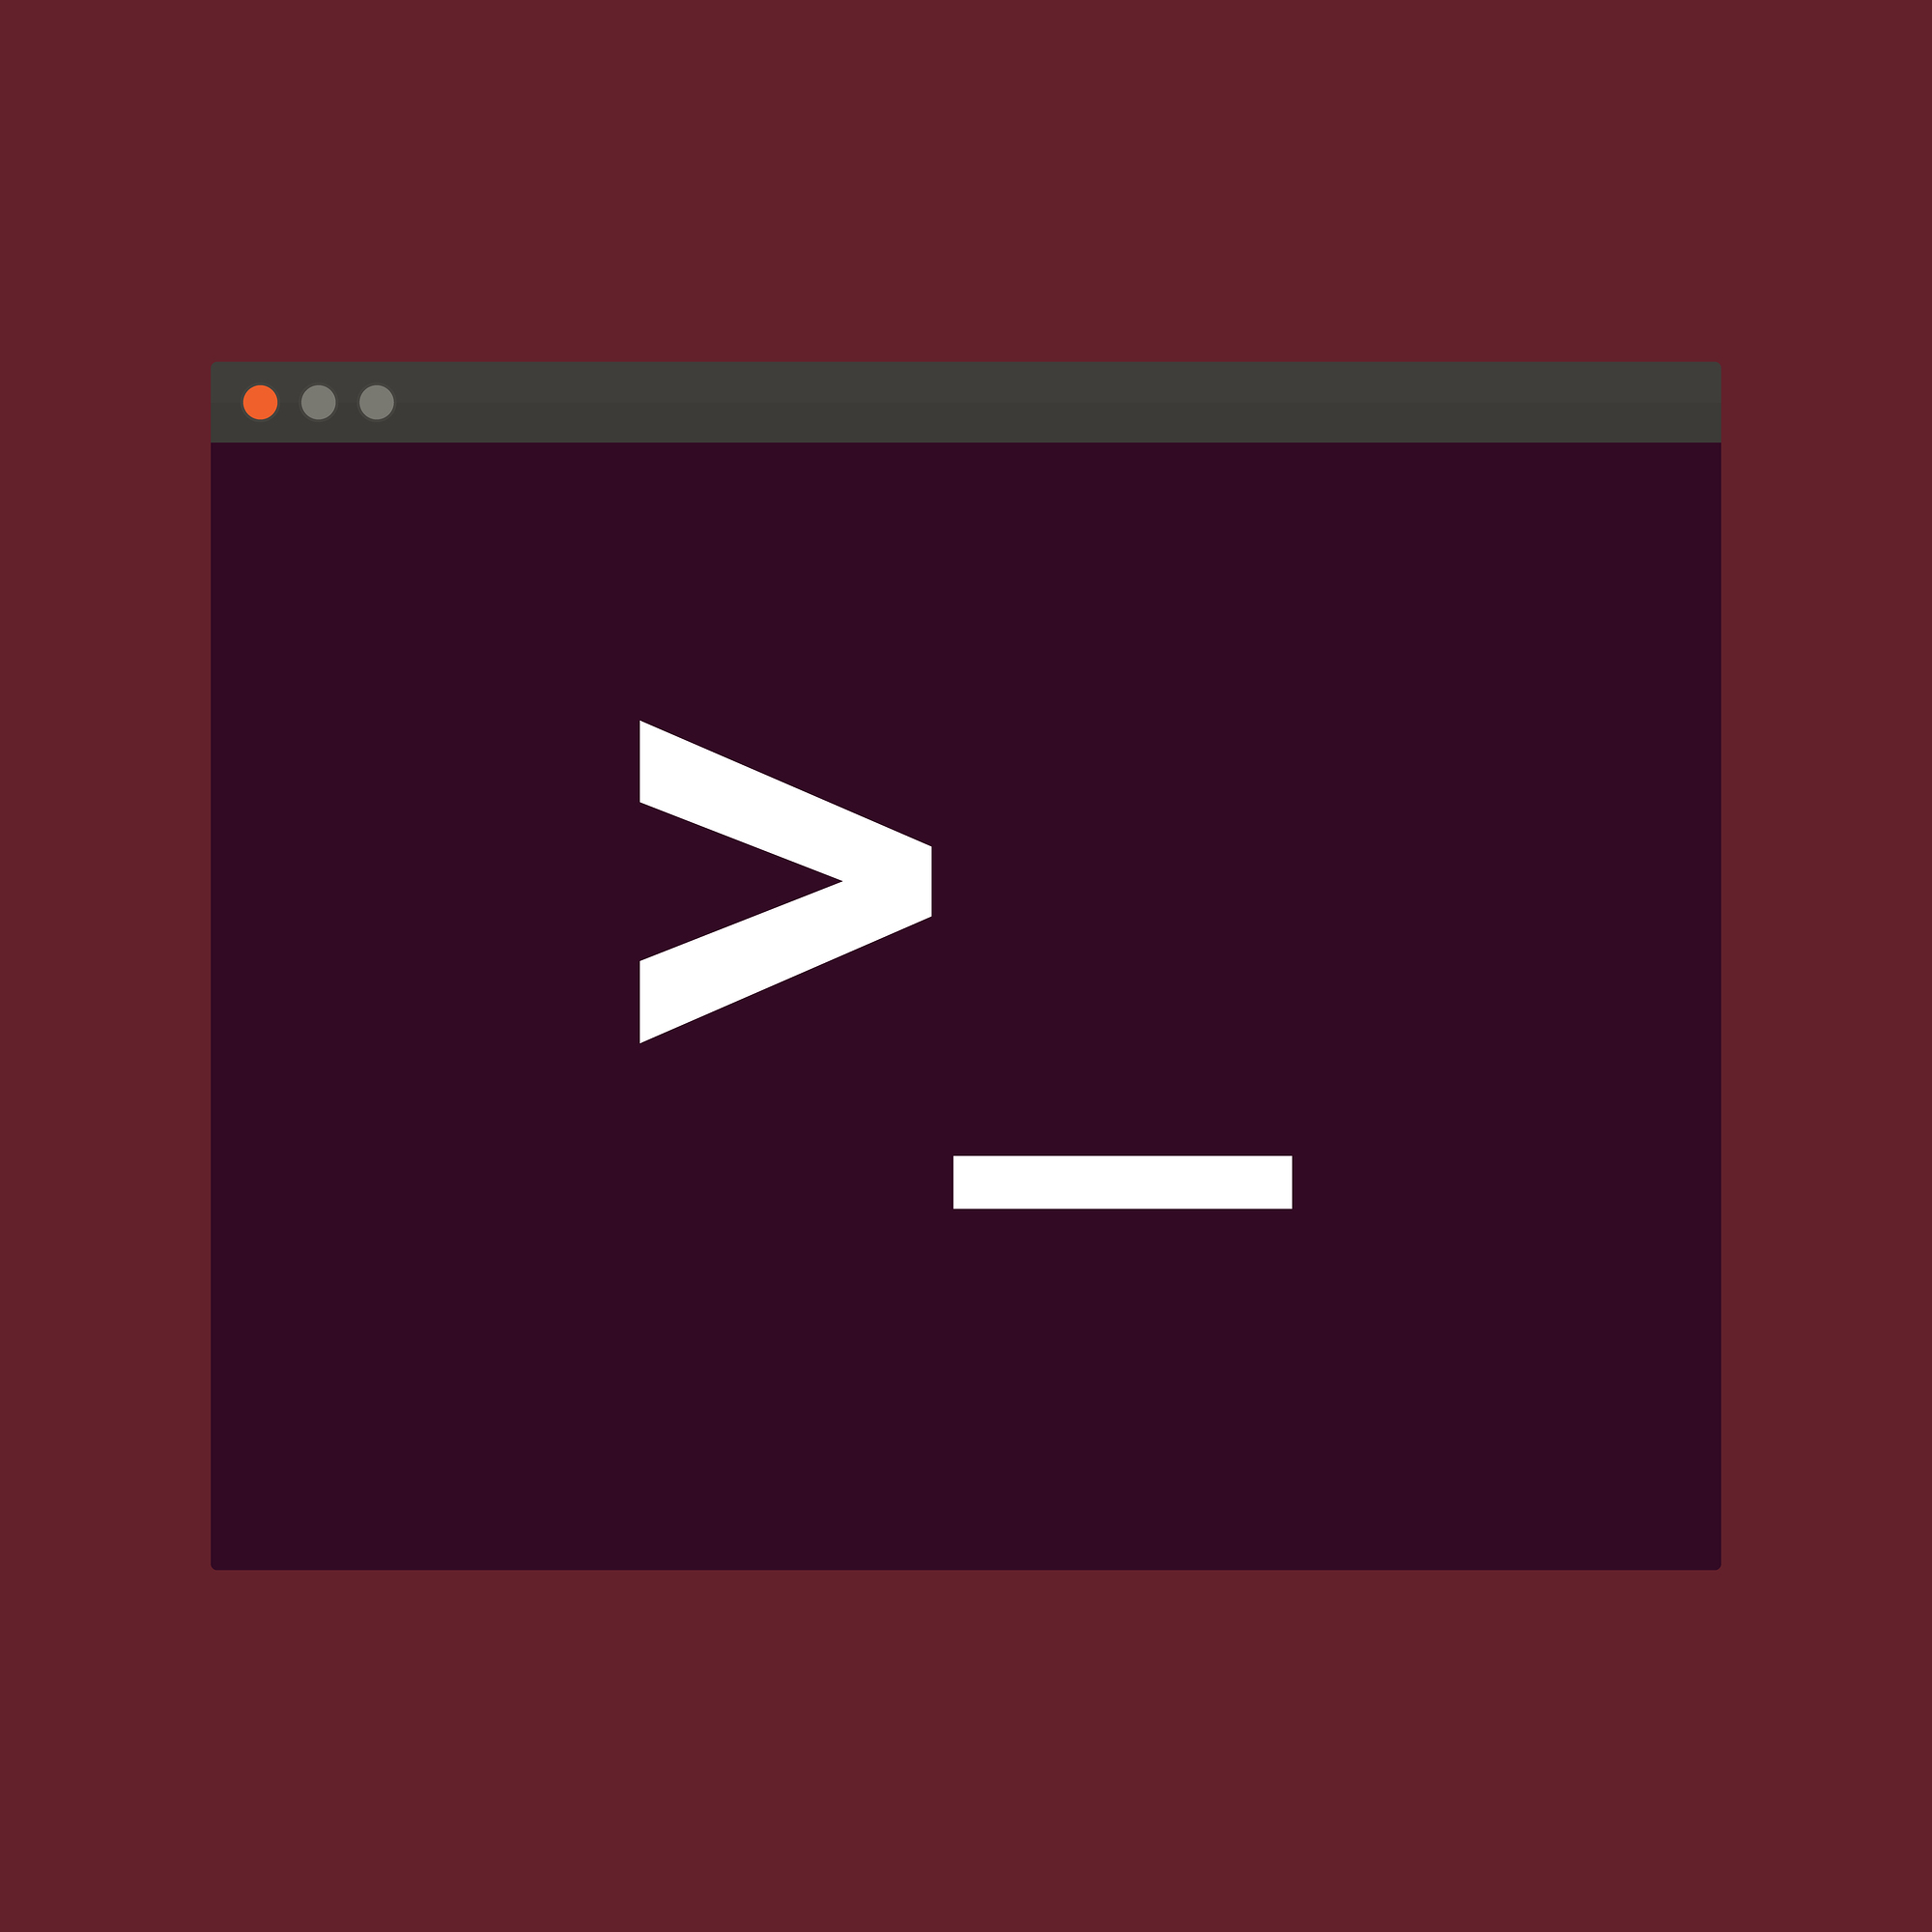 Terminal startup icon, direct access to system via command line